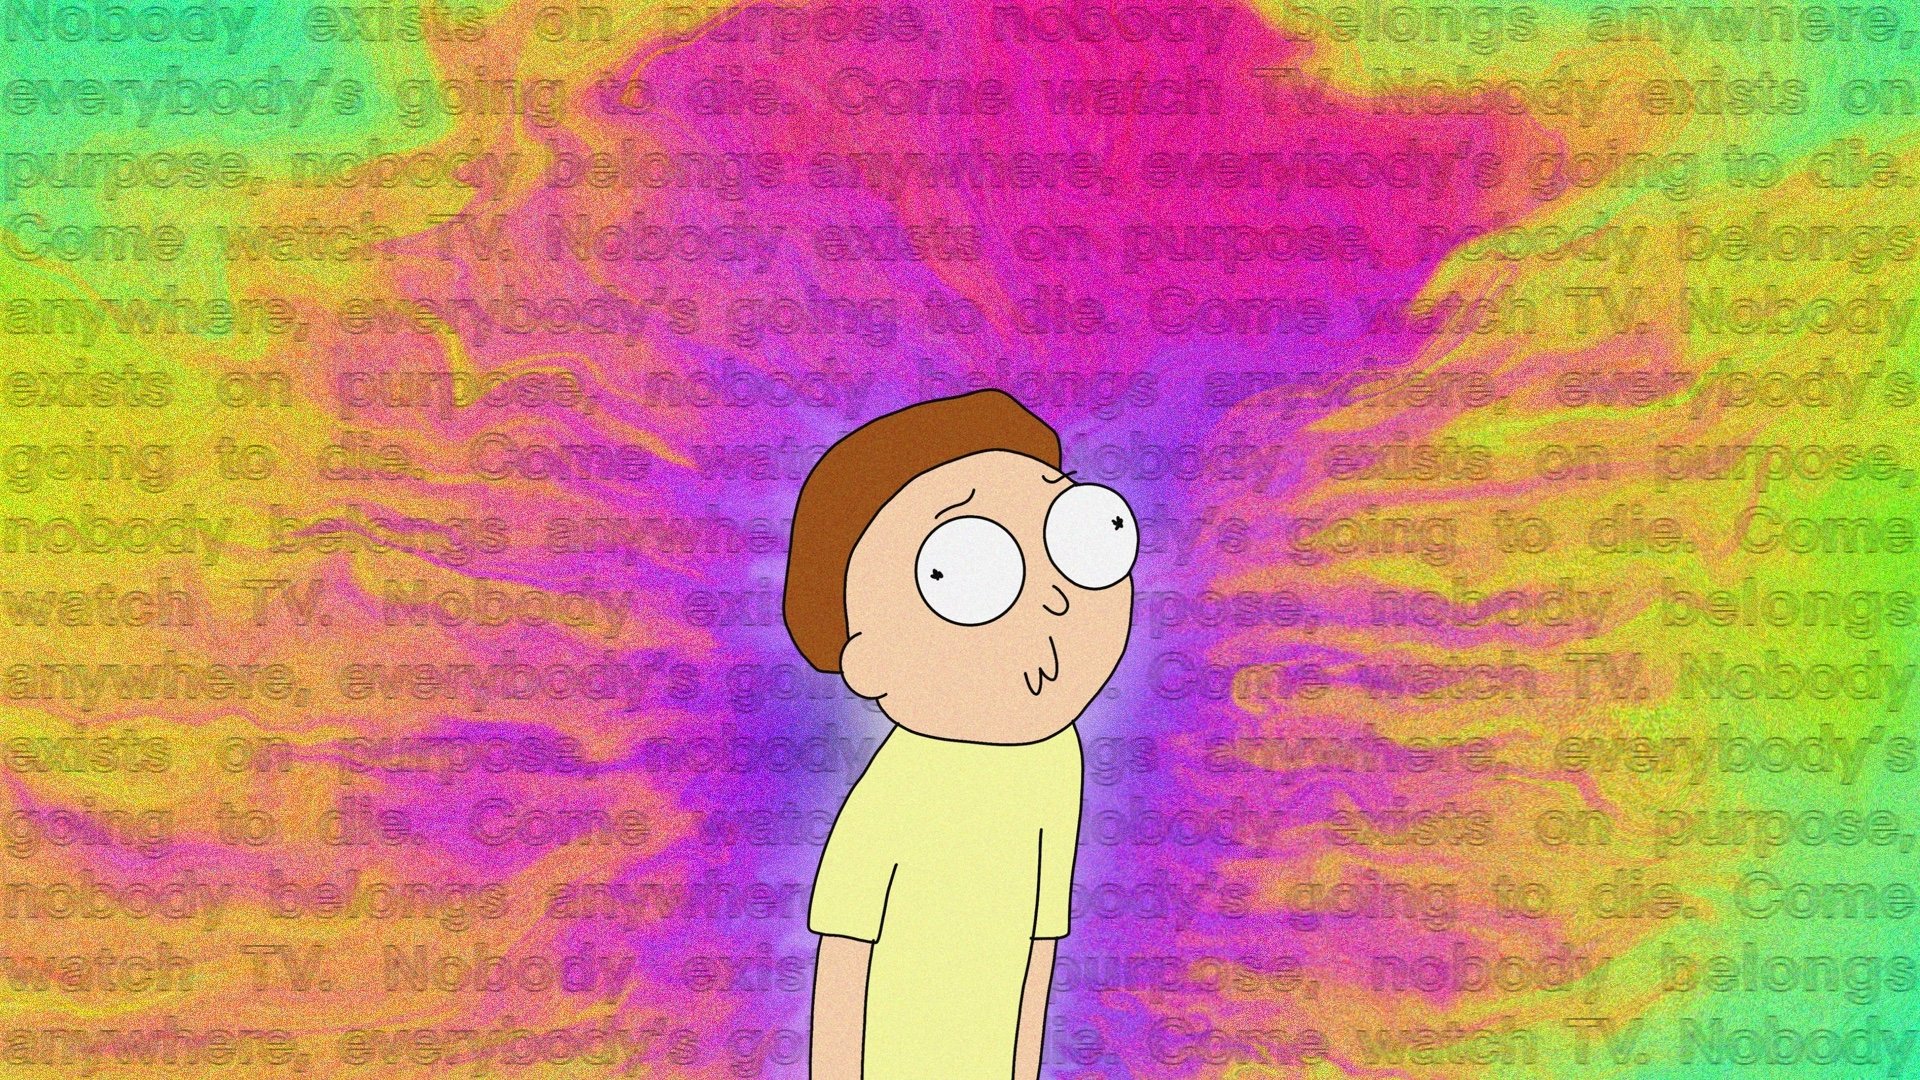 1920x1080 Morty - Rick and Morty by taniapinto24 Wallpaper Background Image...